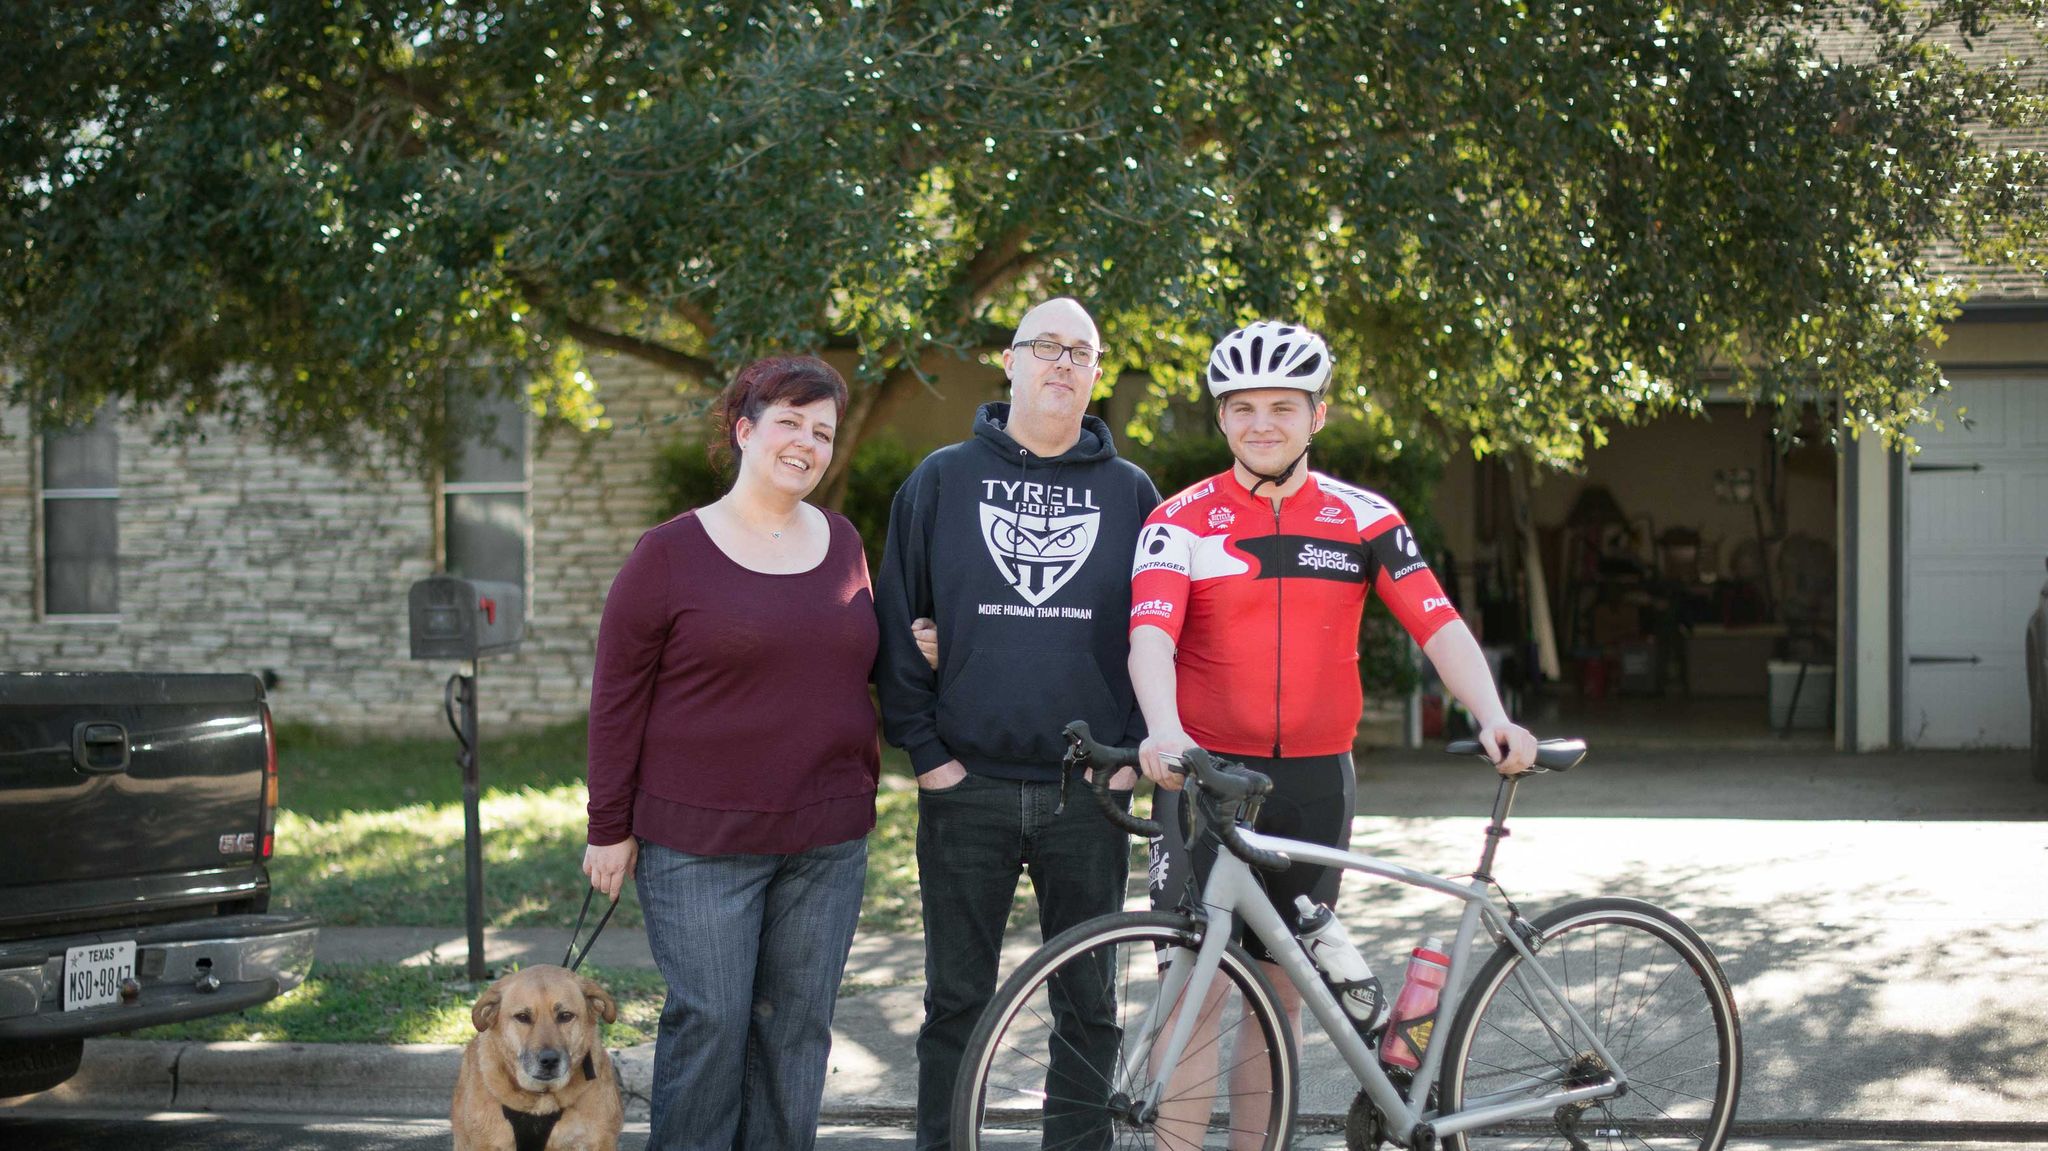 bryan albright and his trek Émonda with his aunt, laura waits, and uncle, dylan greedy, in austin, tx,  on sunday, december 29, 2019